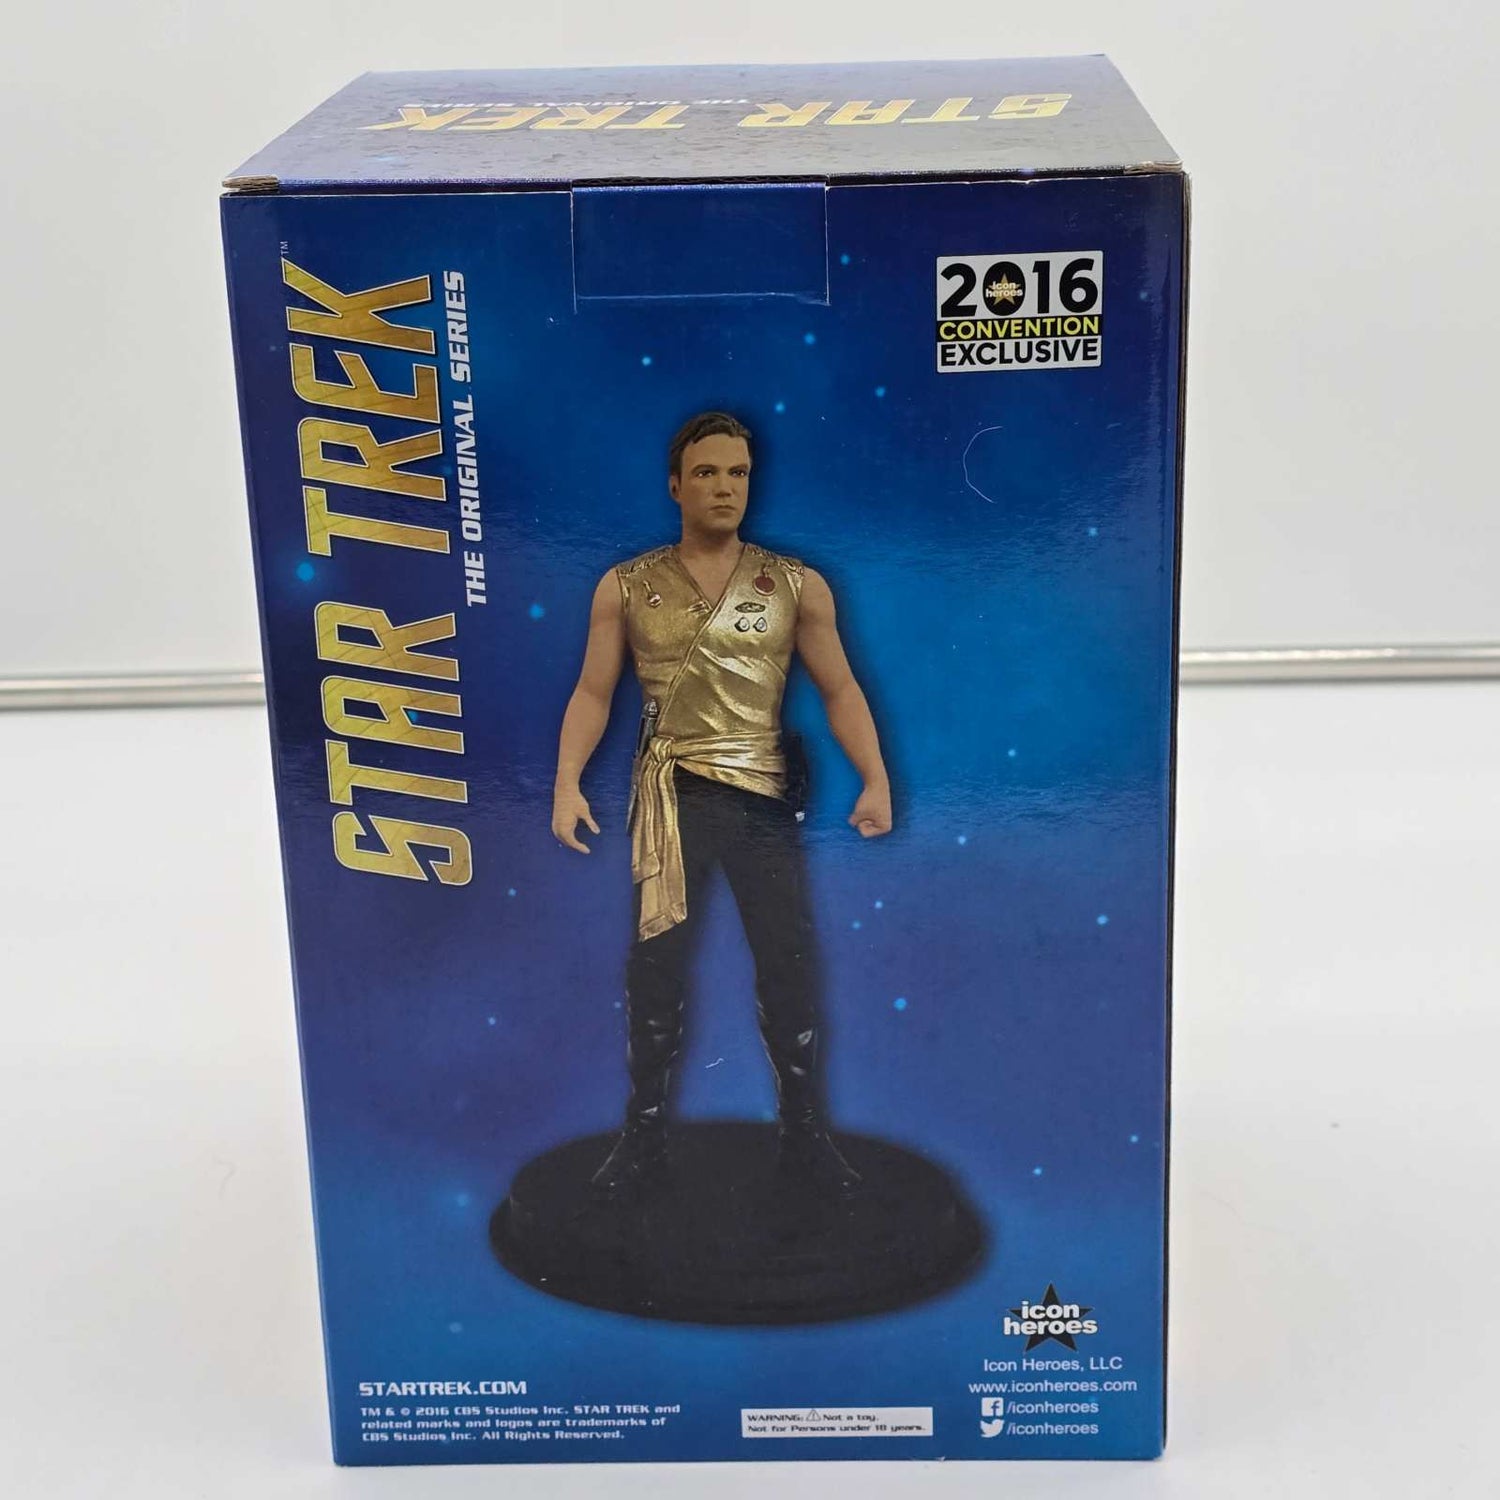 Captain kirk 2016 mirror universe statue by Icon Heroes limited to 1000